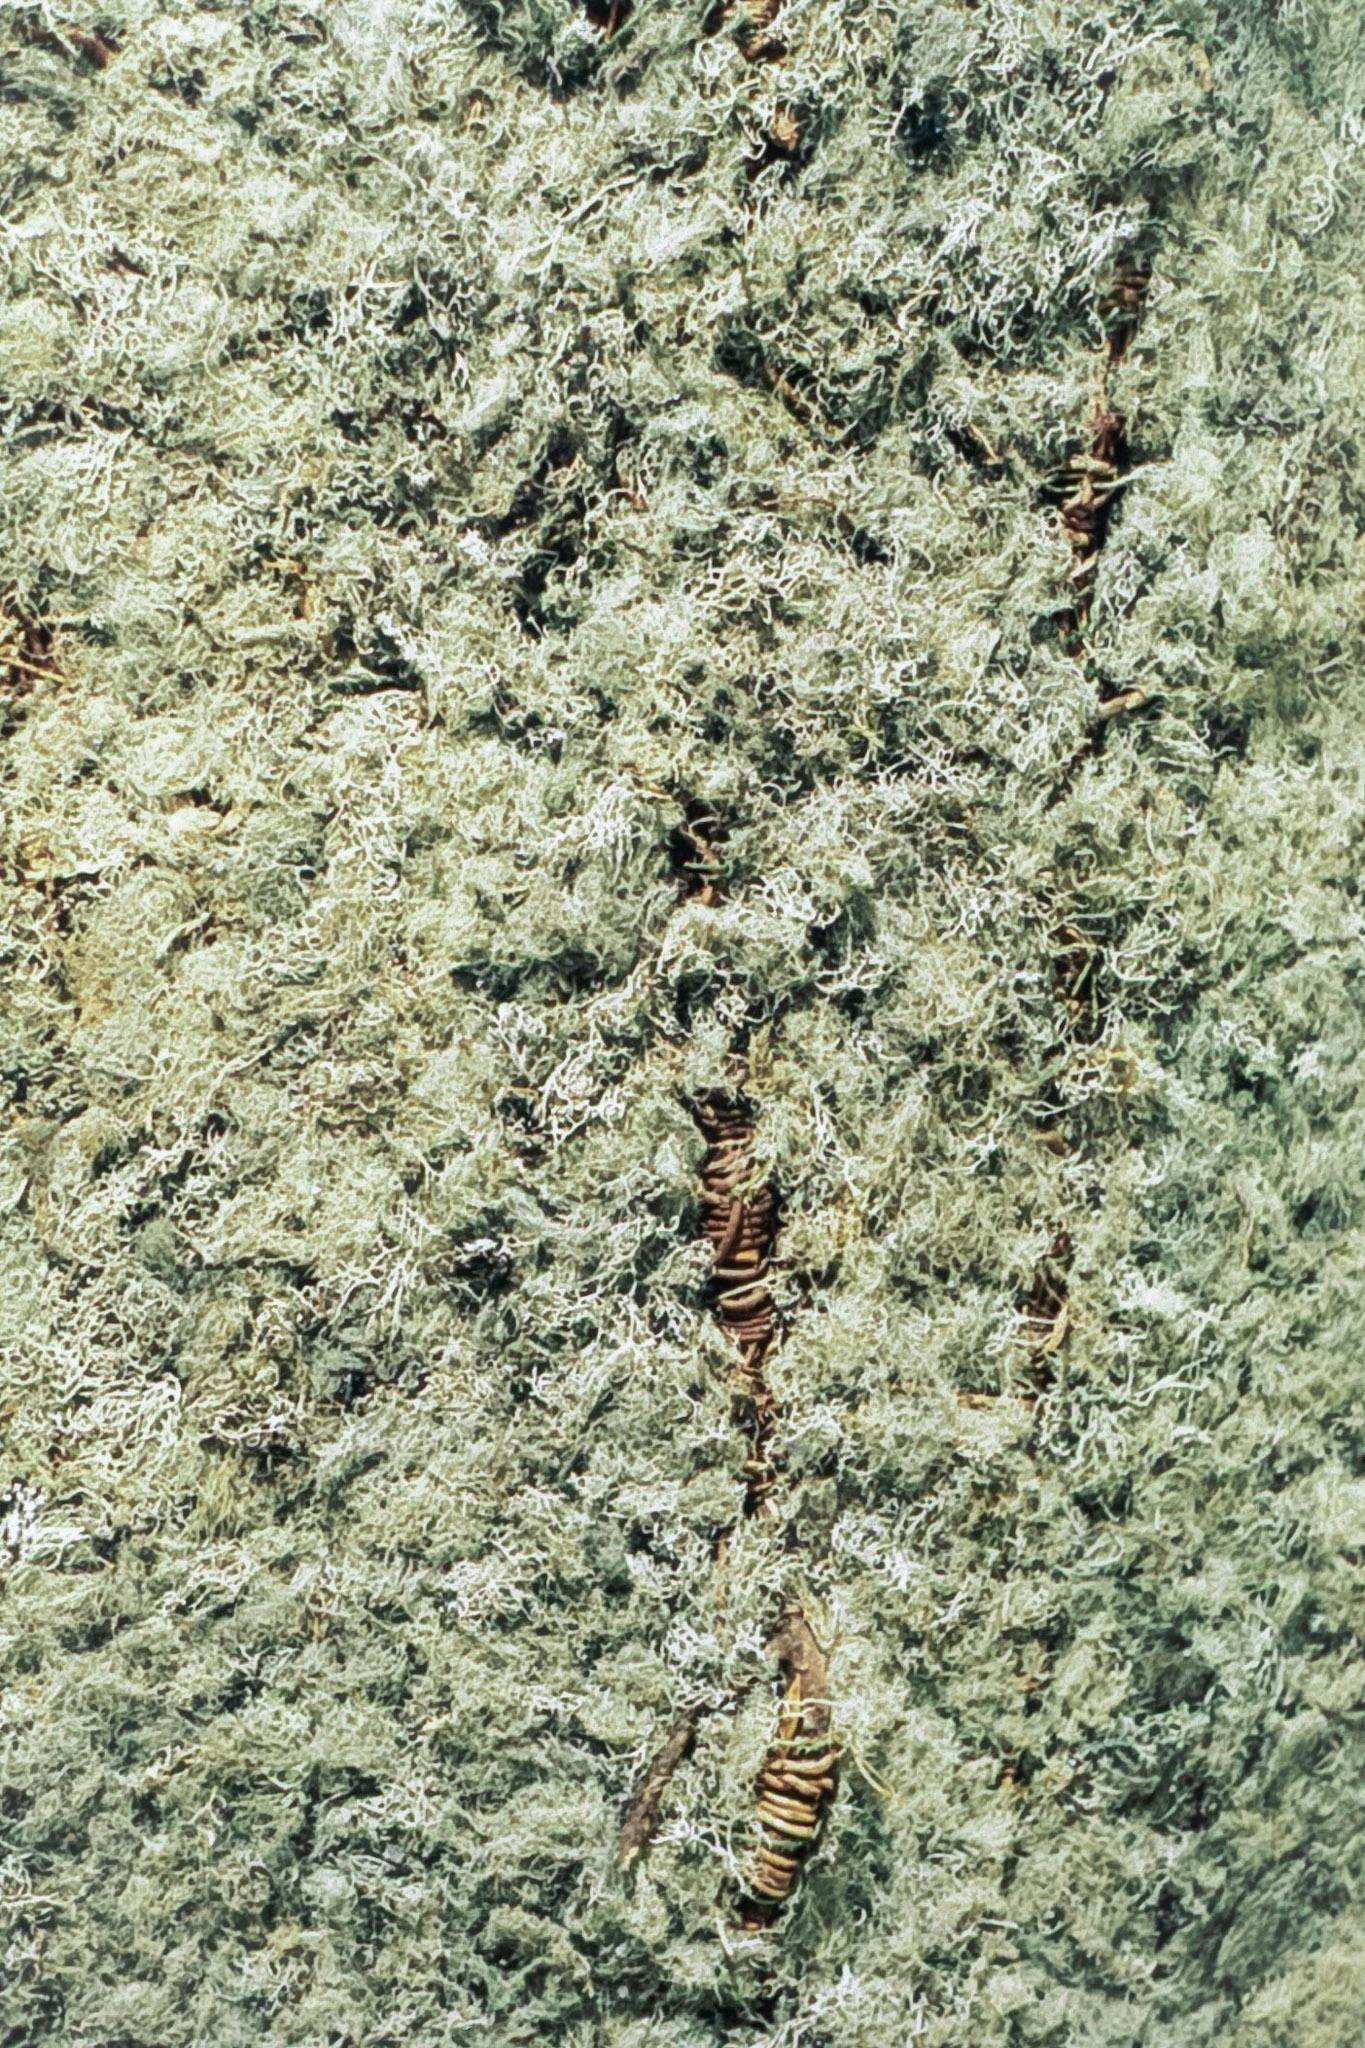 A closeup of a dense bed of moss, with several small pieces of coiled and rusty wire poking through. The moss is pale yellow-green and the wire is different shades of orange-brown.